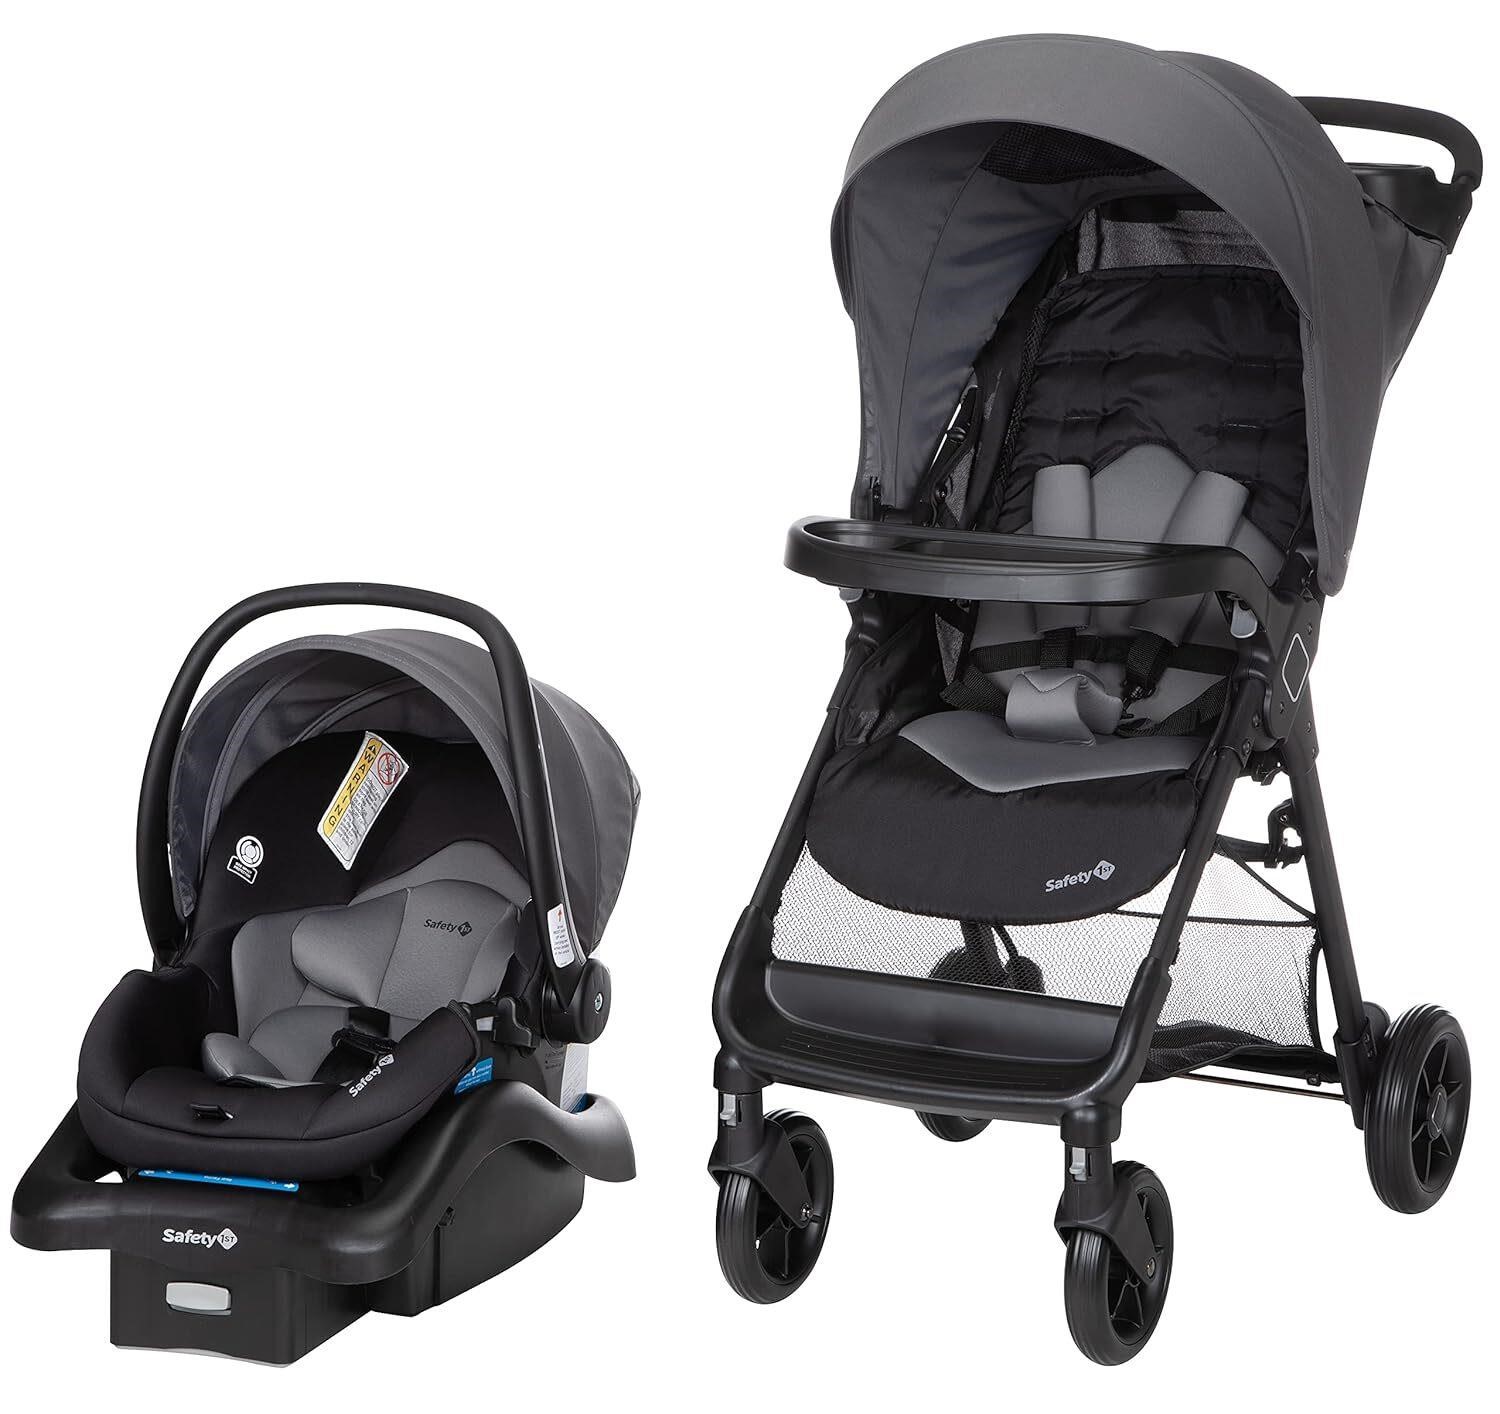 Safety 1st Smooth Ride Travel System Stroller